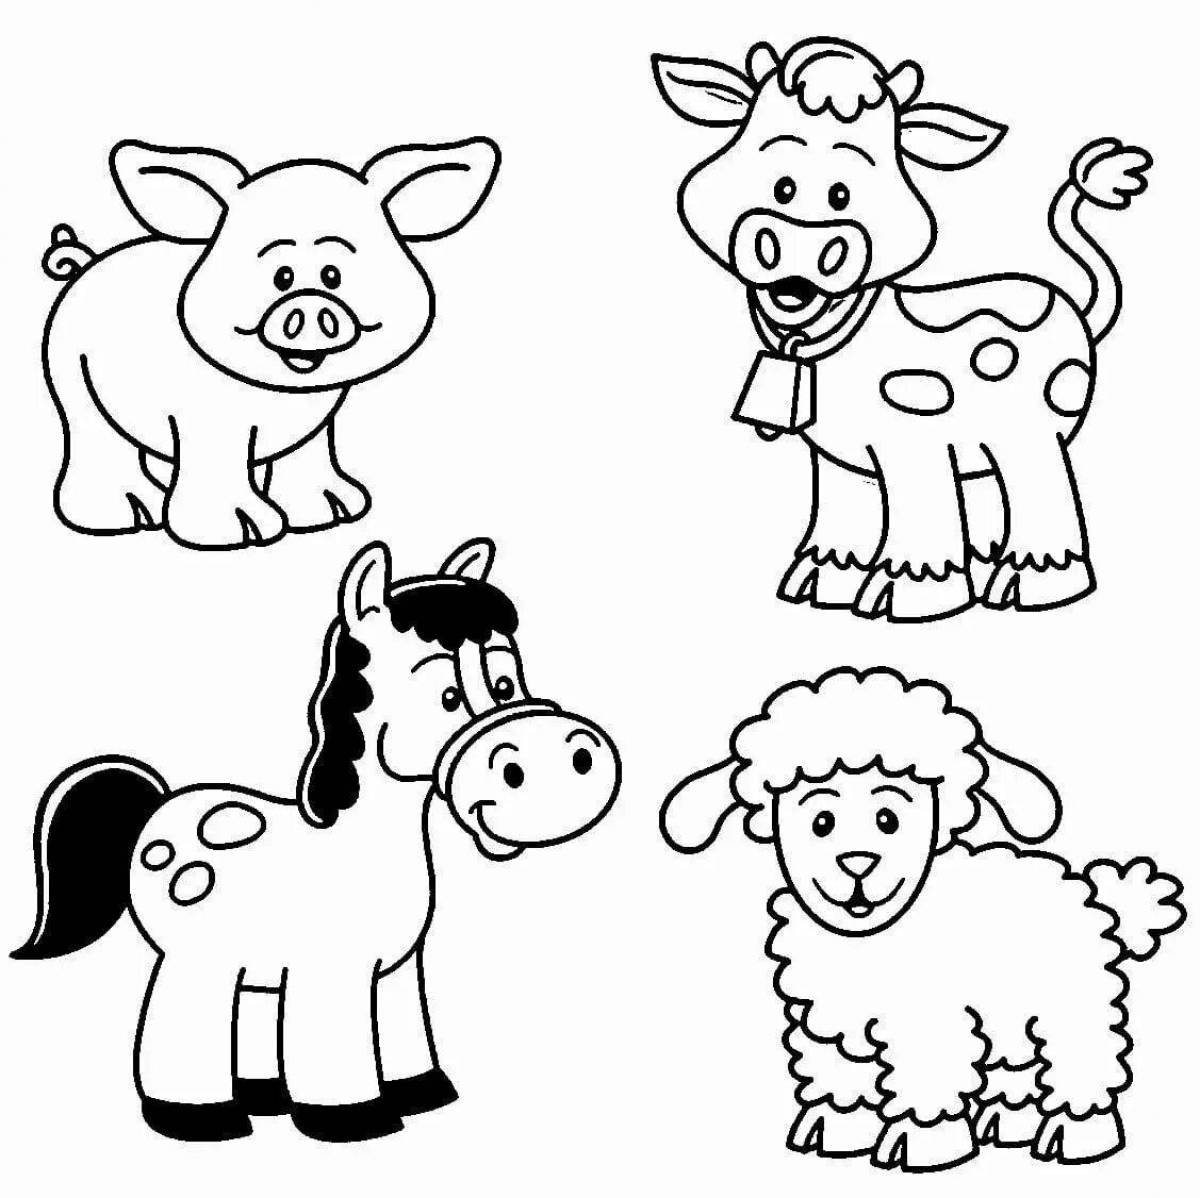 Snuggly coloring page baby animals